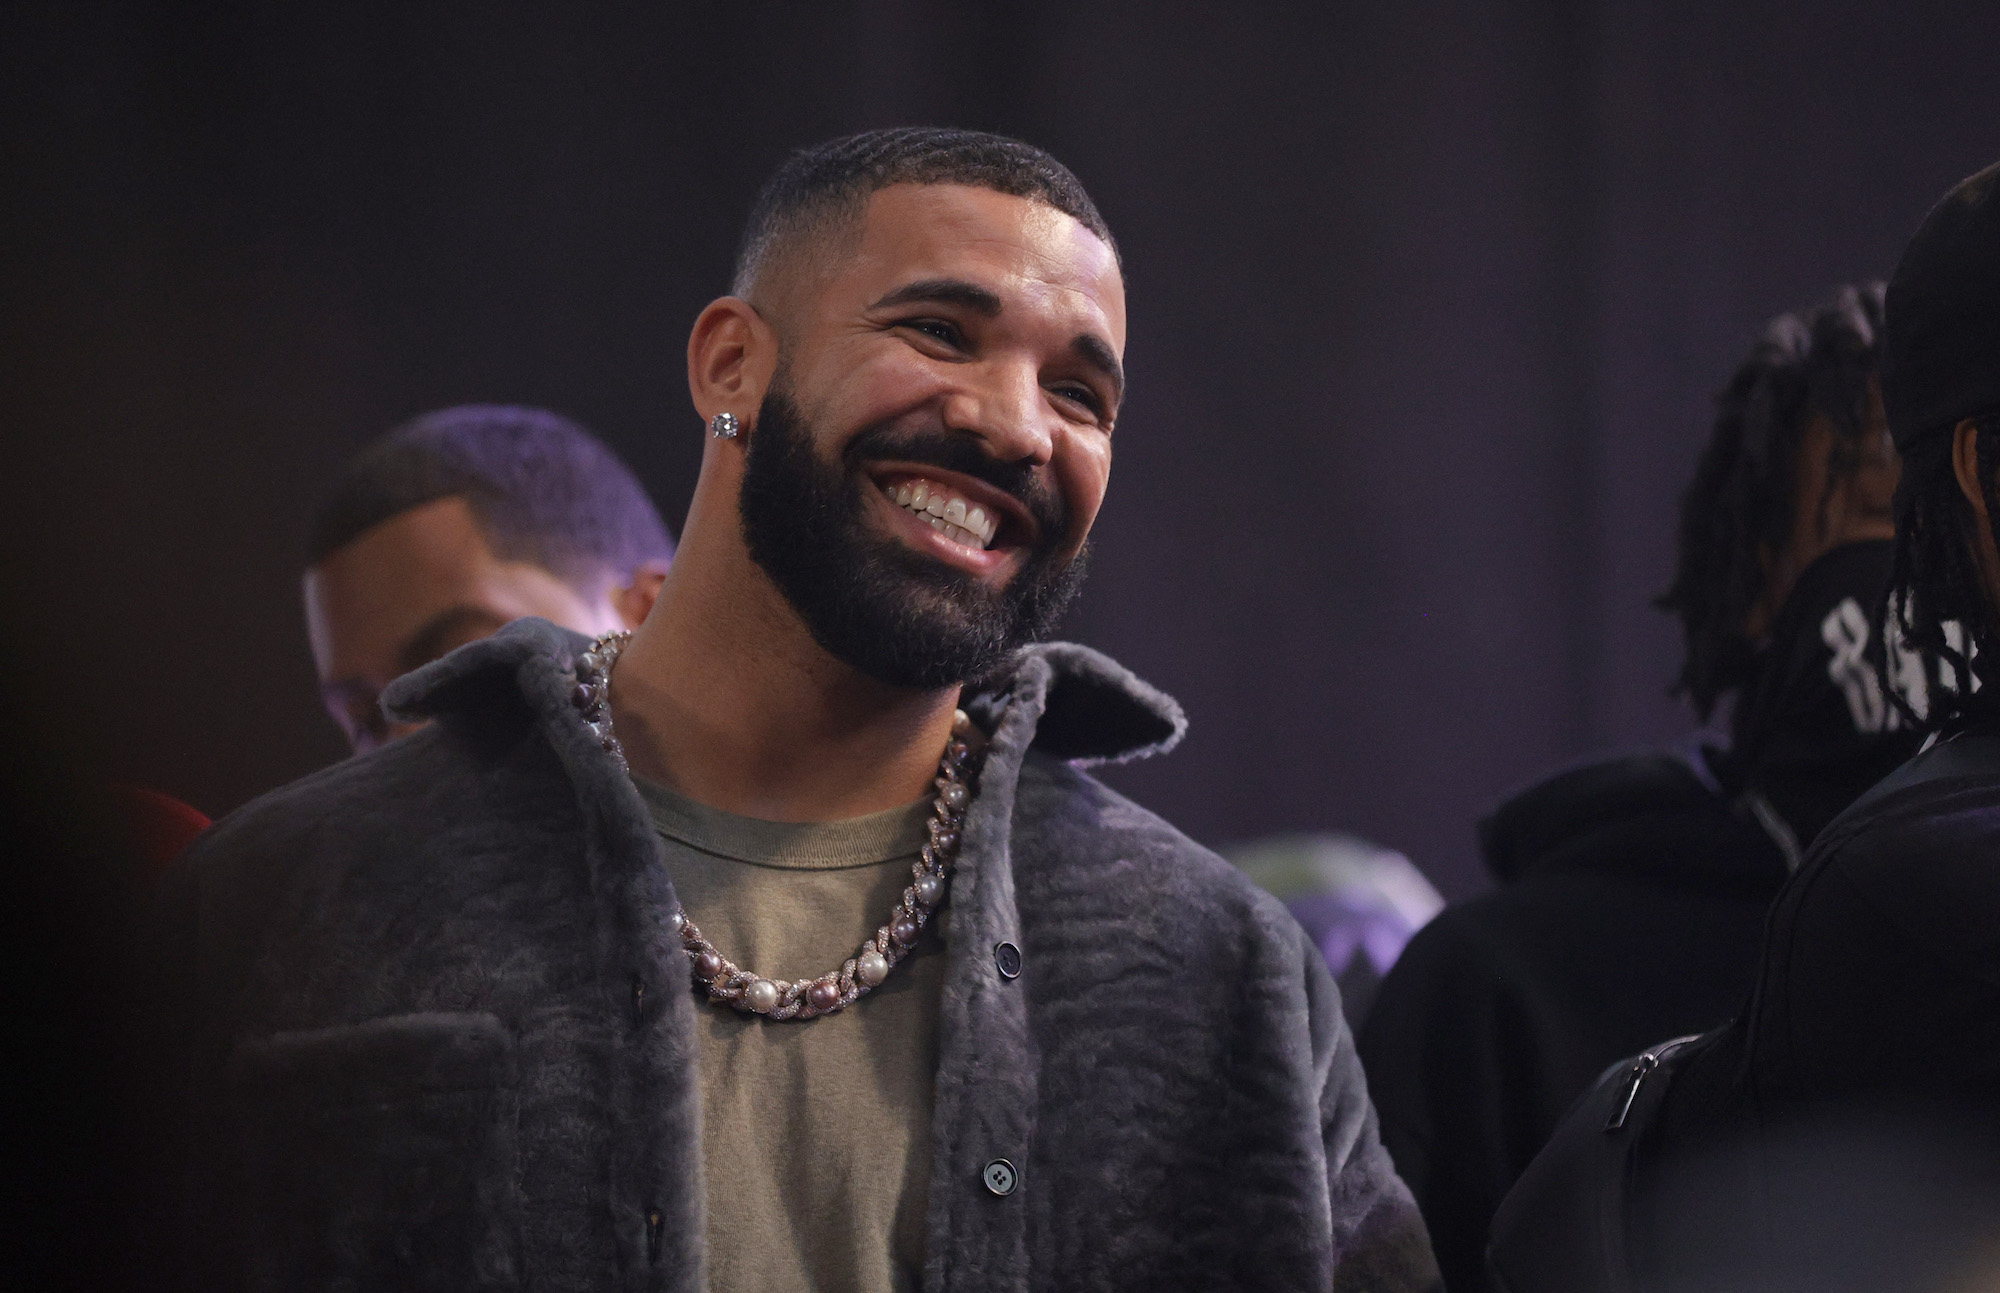 Drake, whose many exes were the subject of a new SNL sketch, smiling for a photo